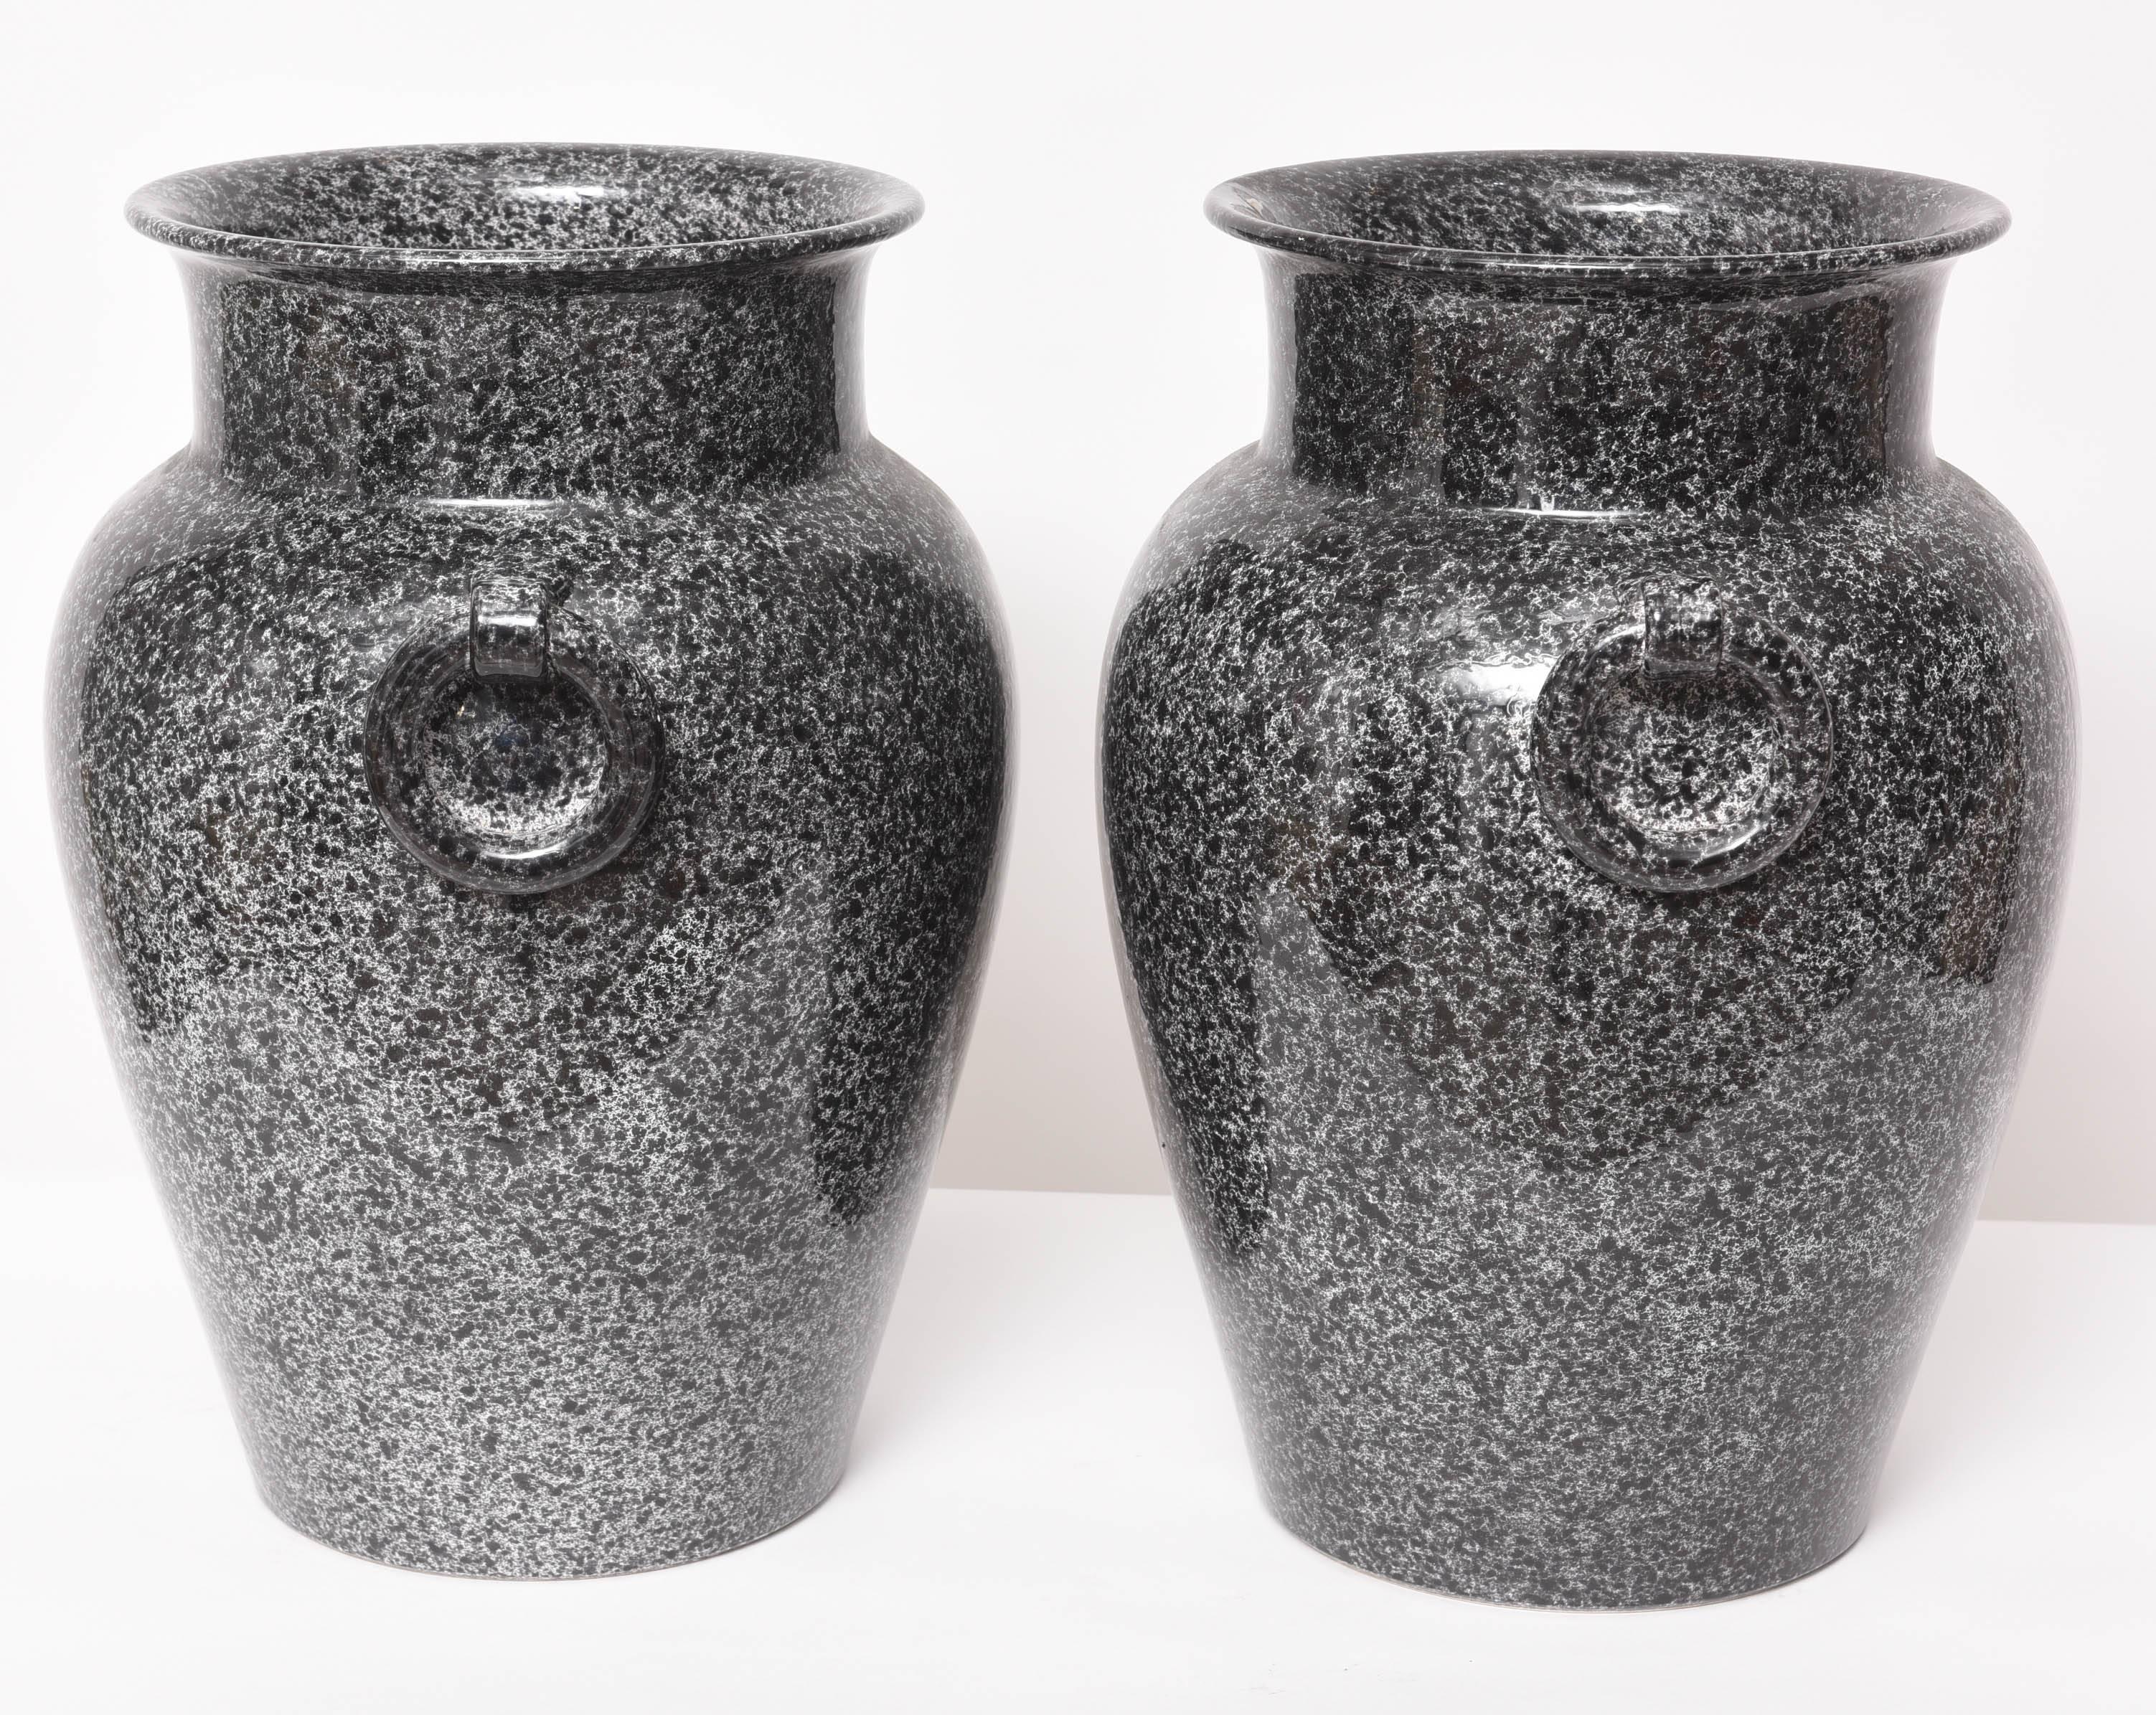 Pair of Midcentury Glazed American Pottery Urns in Black and Gray  1